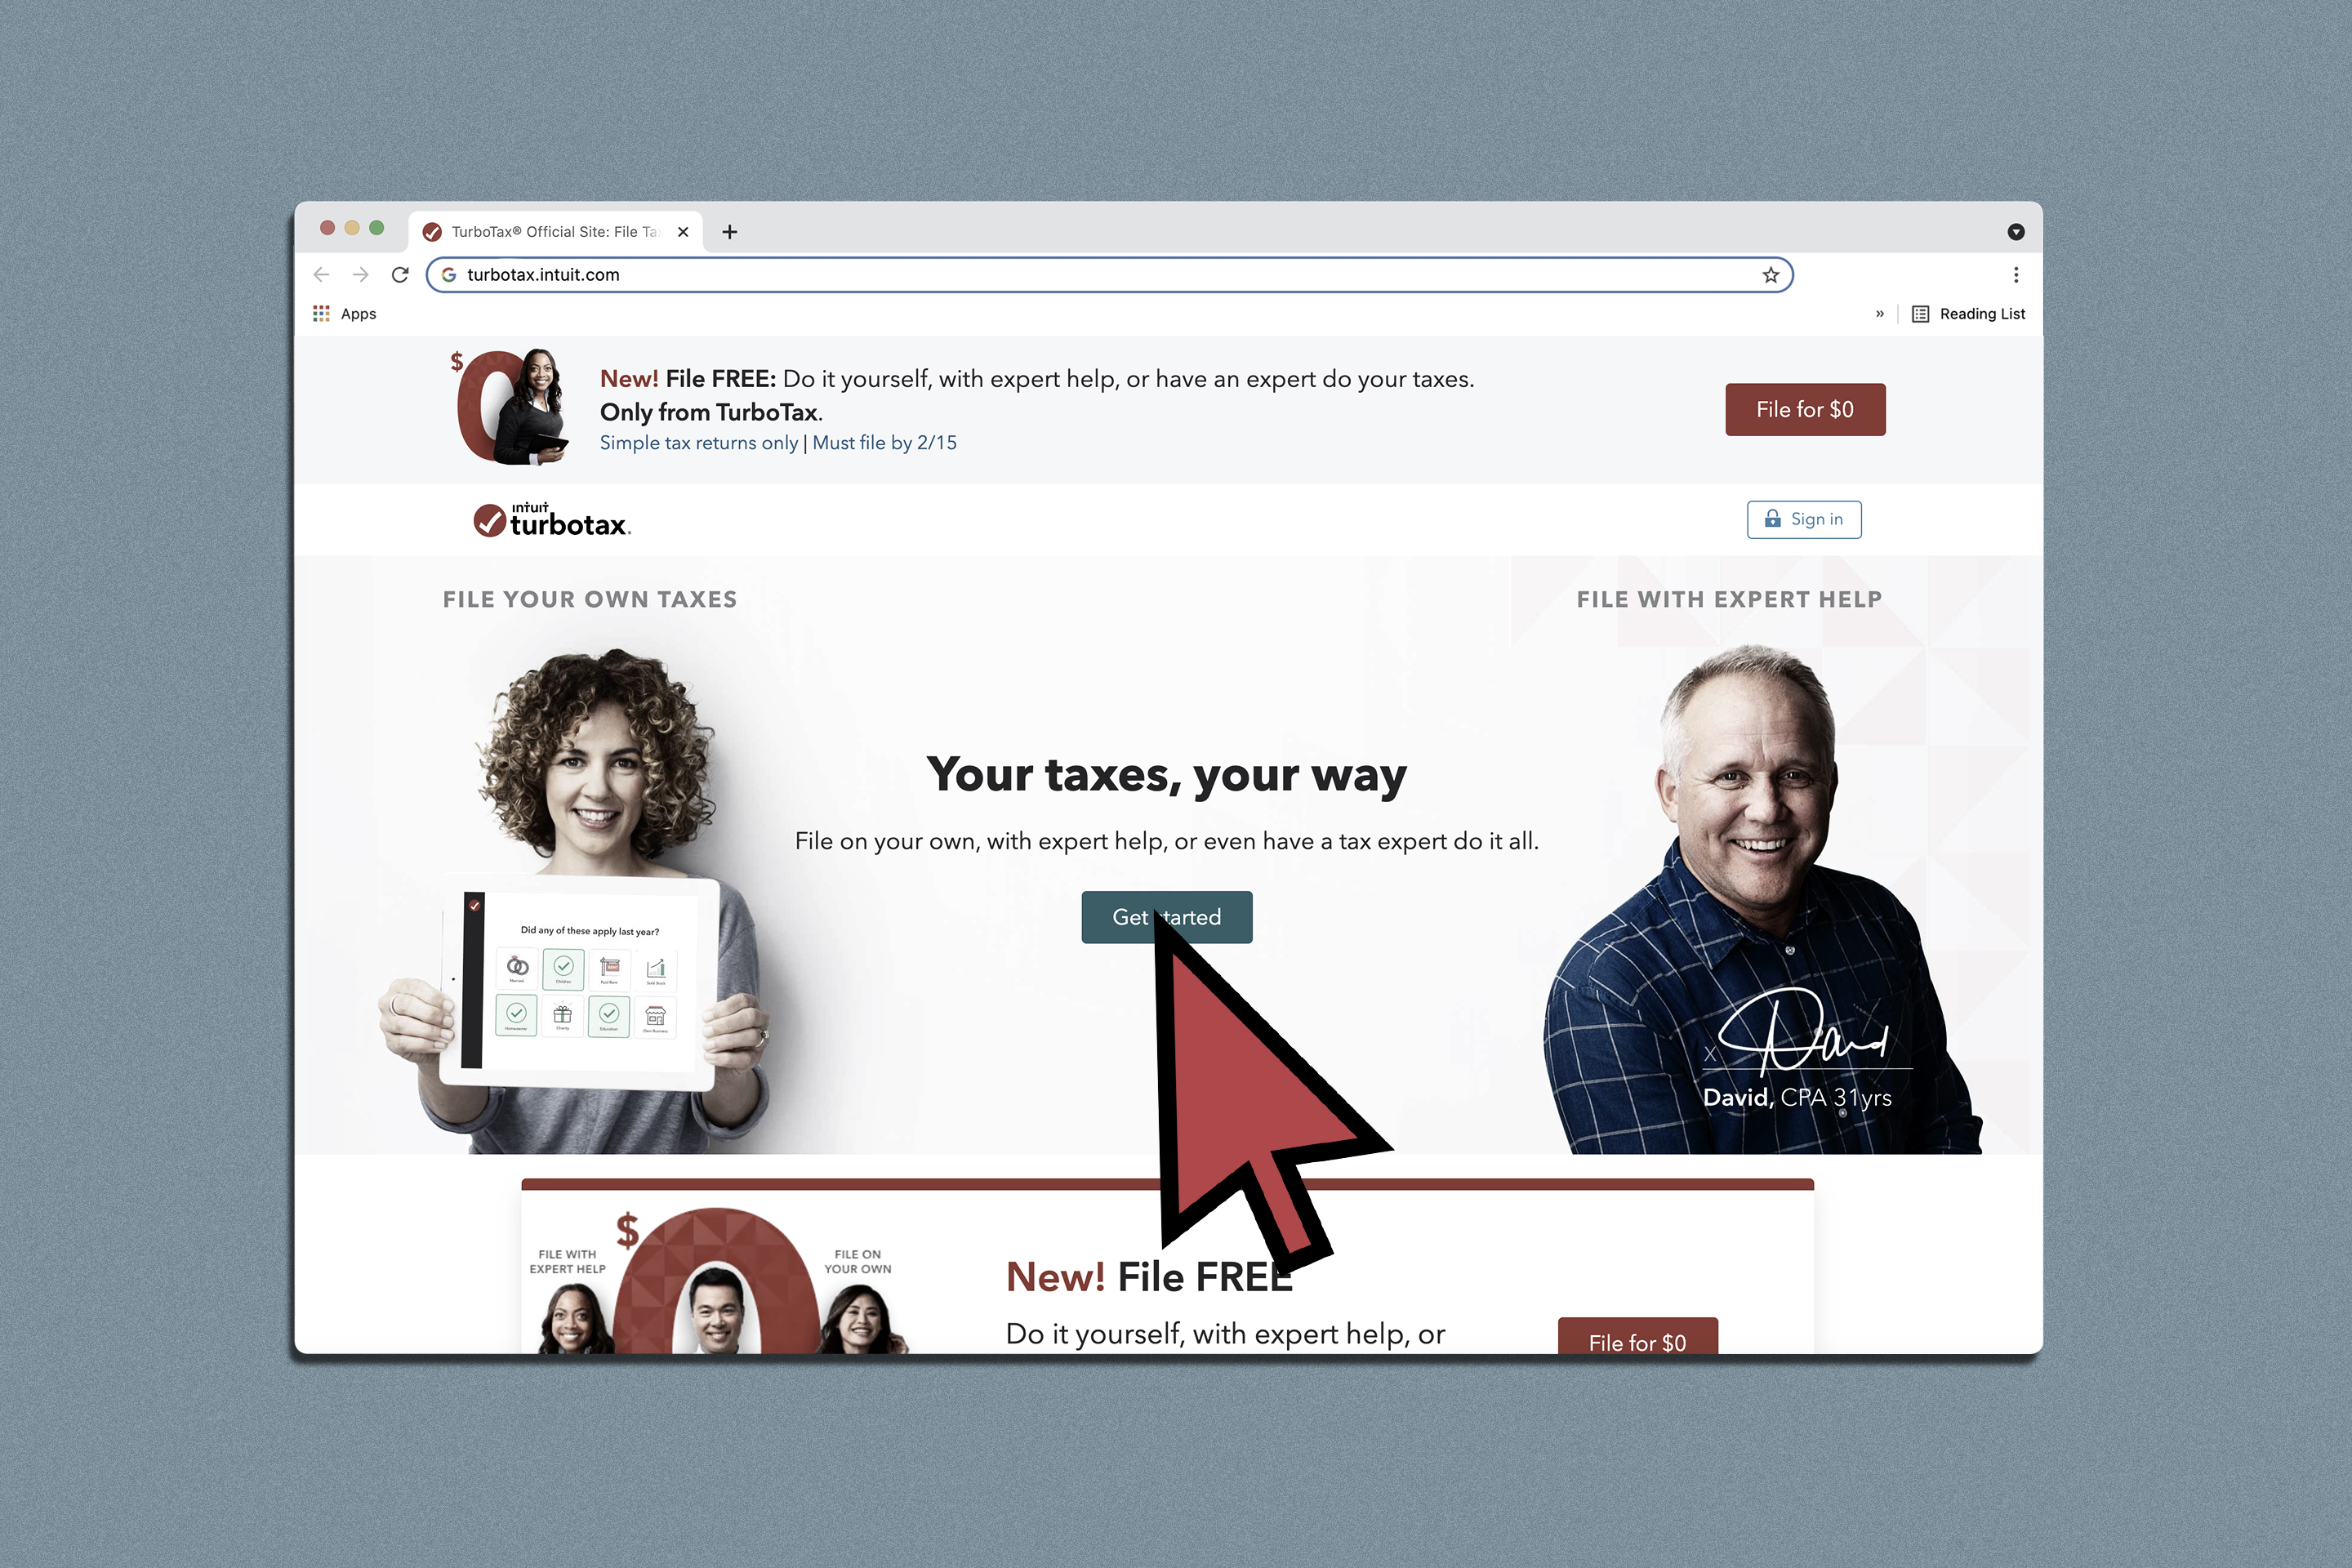 How to File Taxes for Free: TurboTax 2022 Free File Change | Money